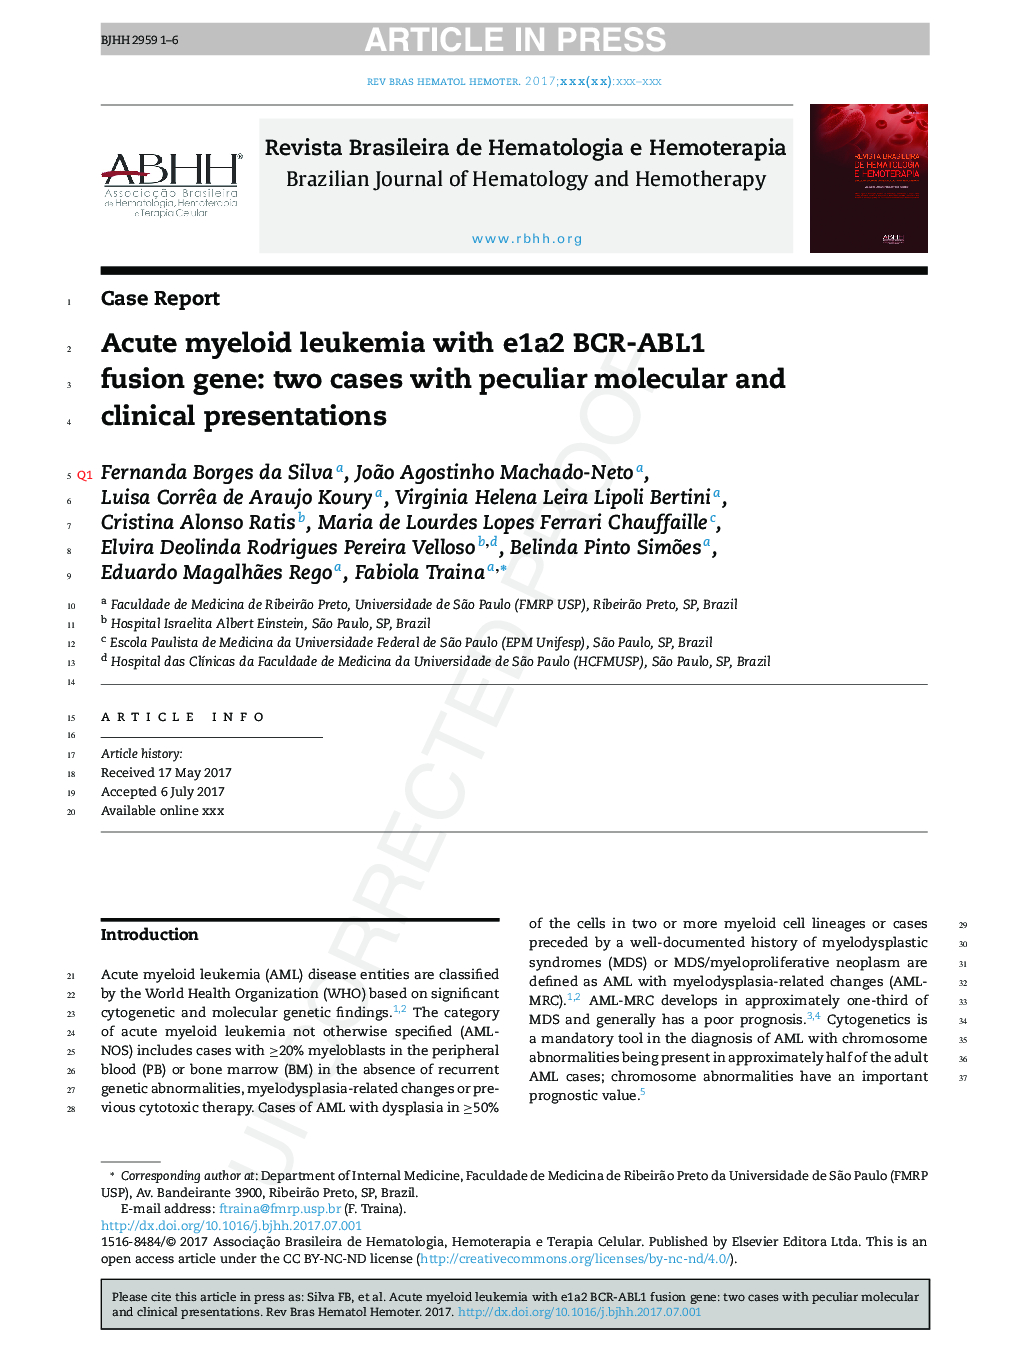 Acute myeloid leukemia with e1a2 BCR-ABL1 fusion gene: two cases with peculiar molecular and clinical presentations